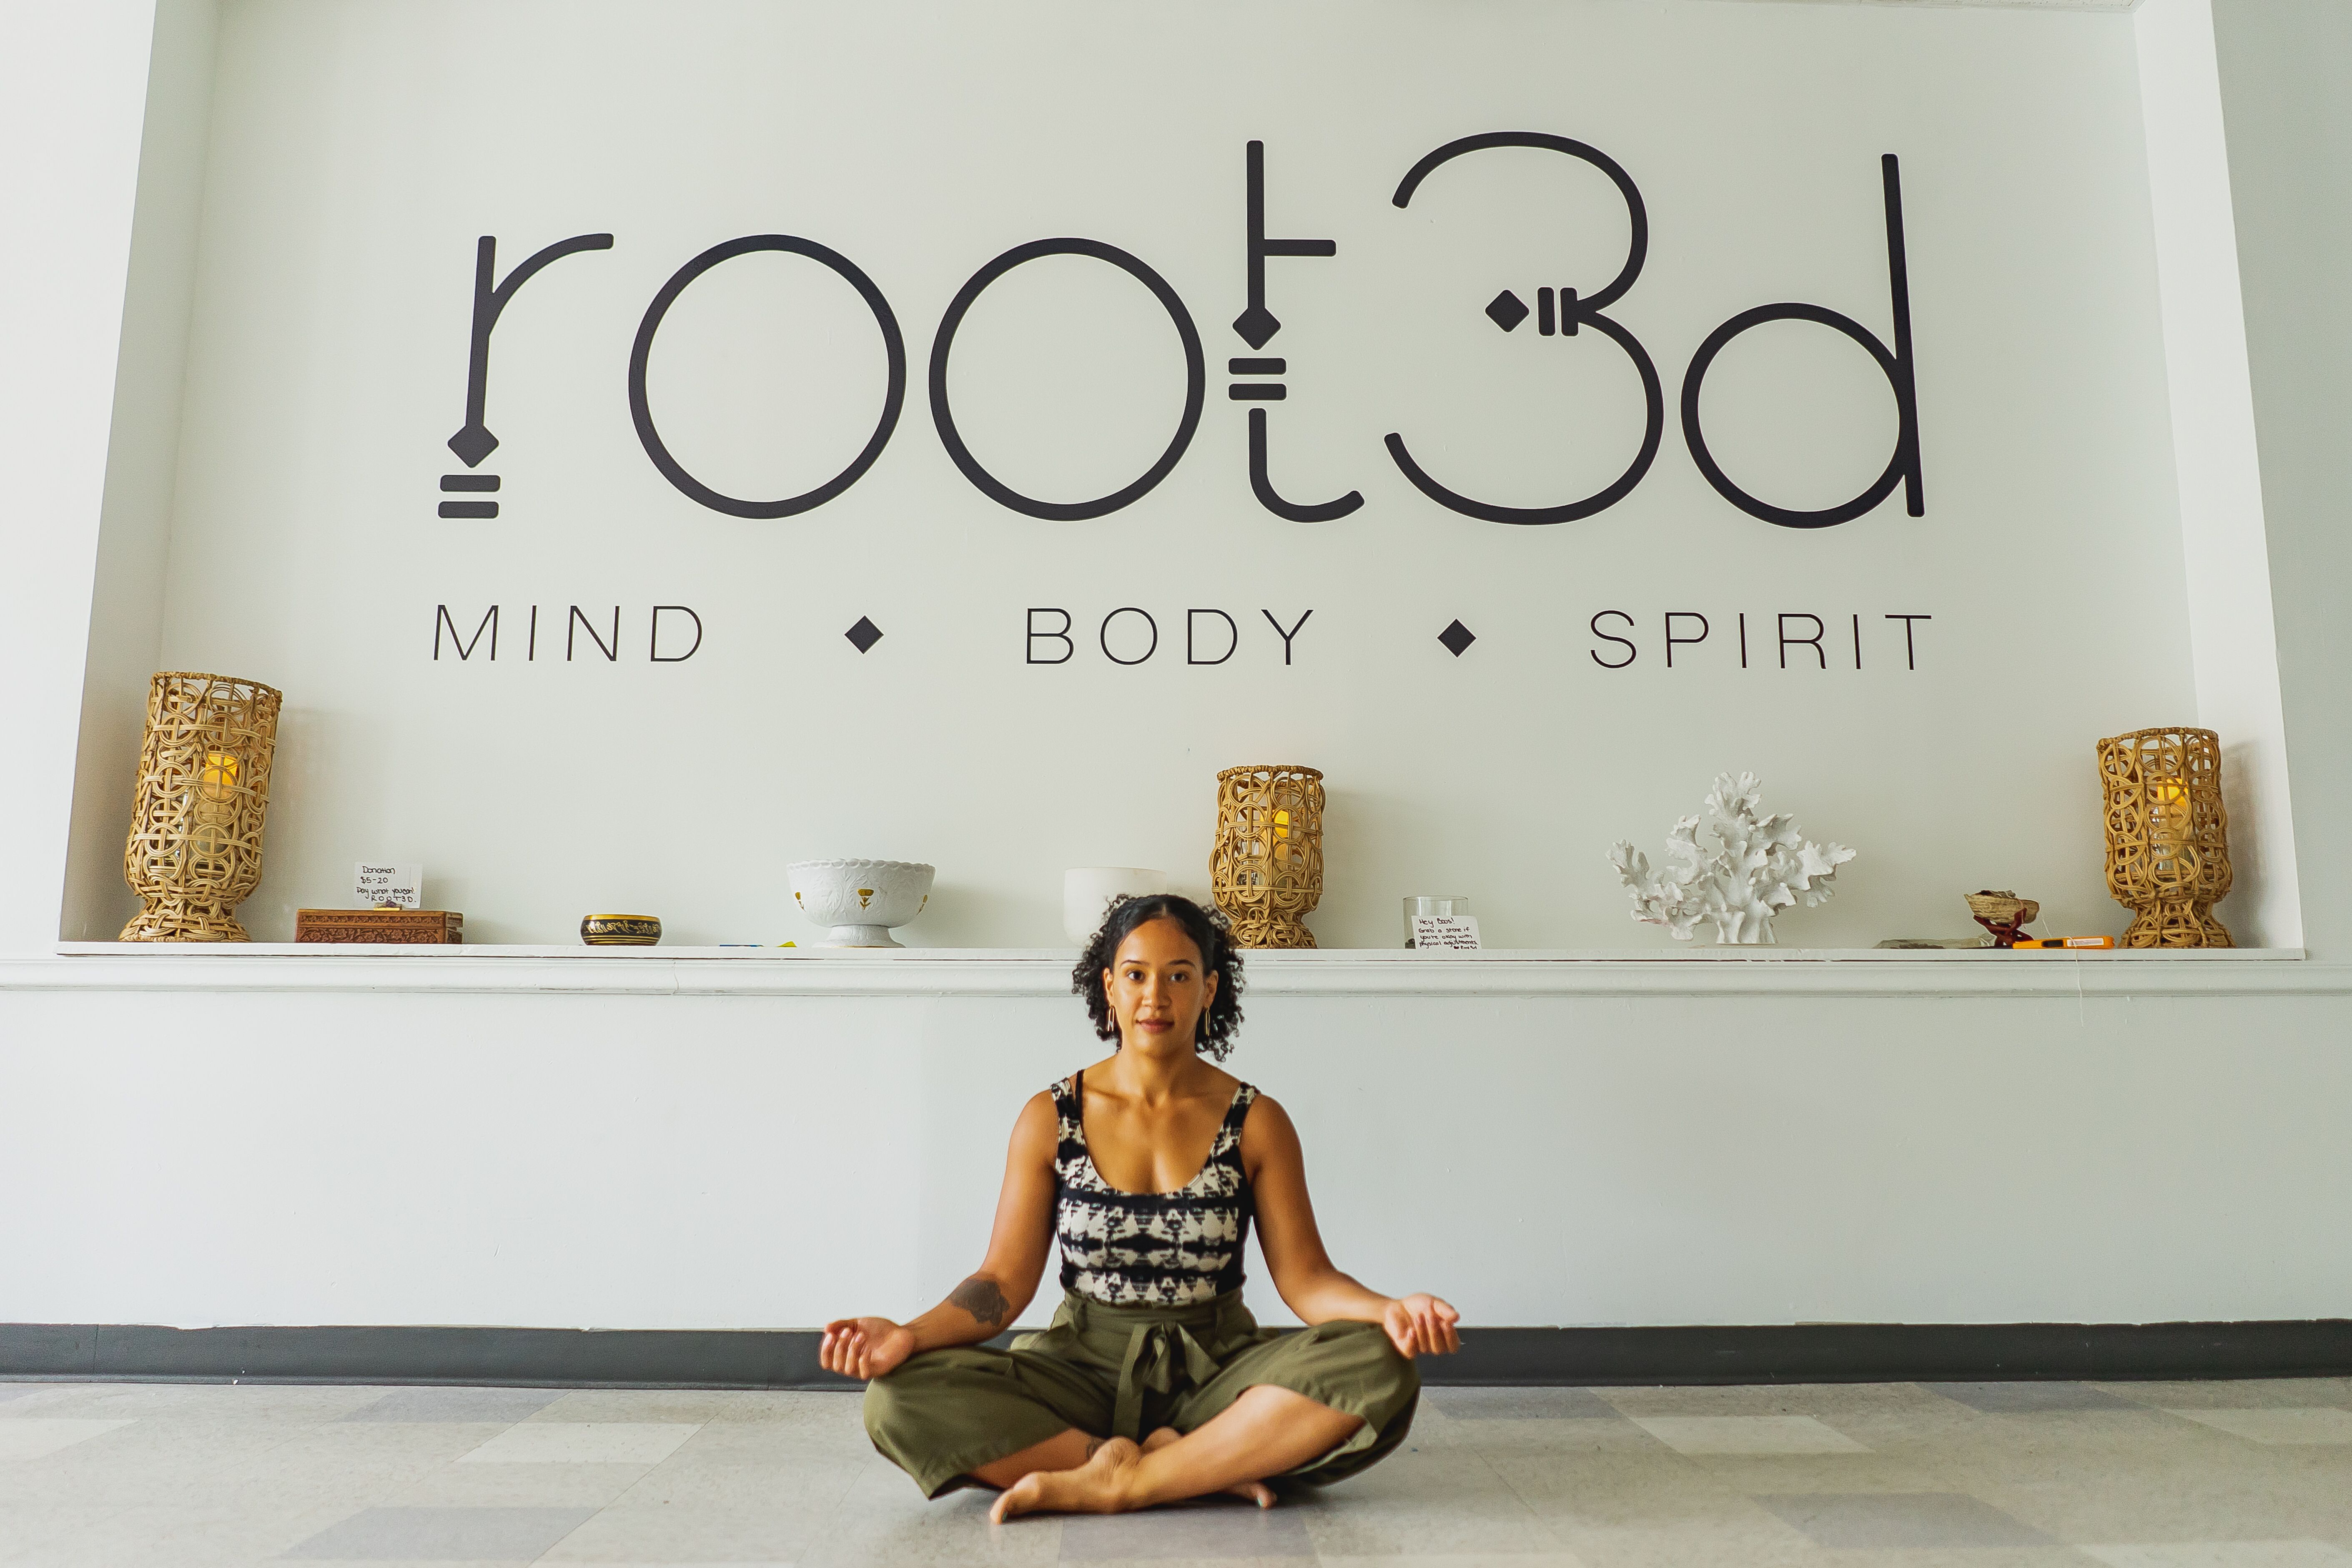 Root3d offers a home for marginalized communities to explore the healing arts